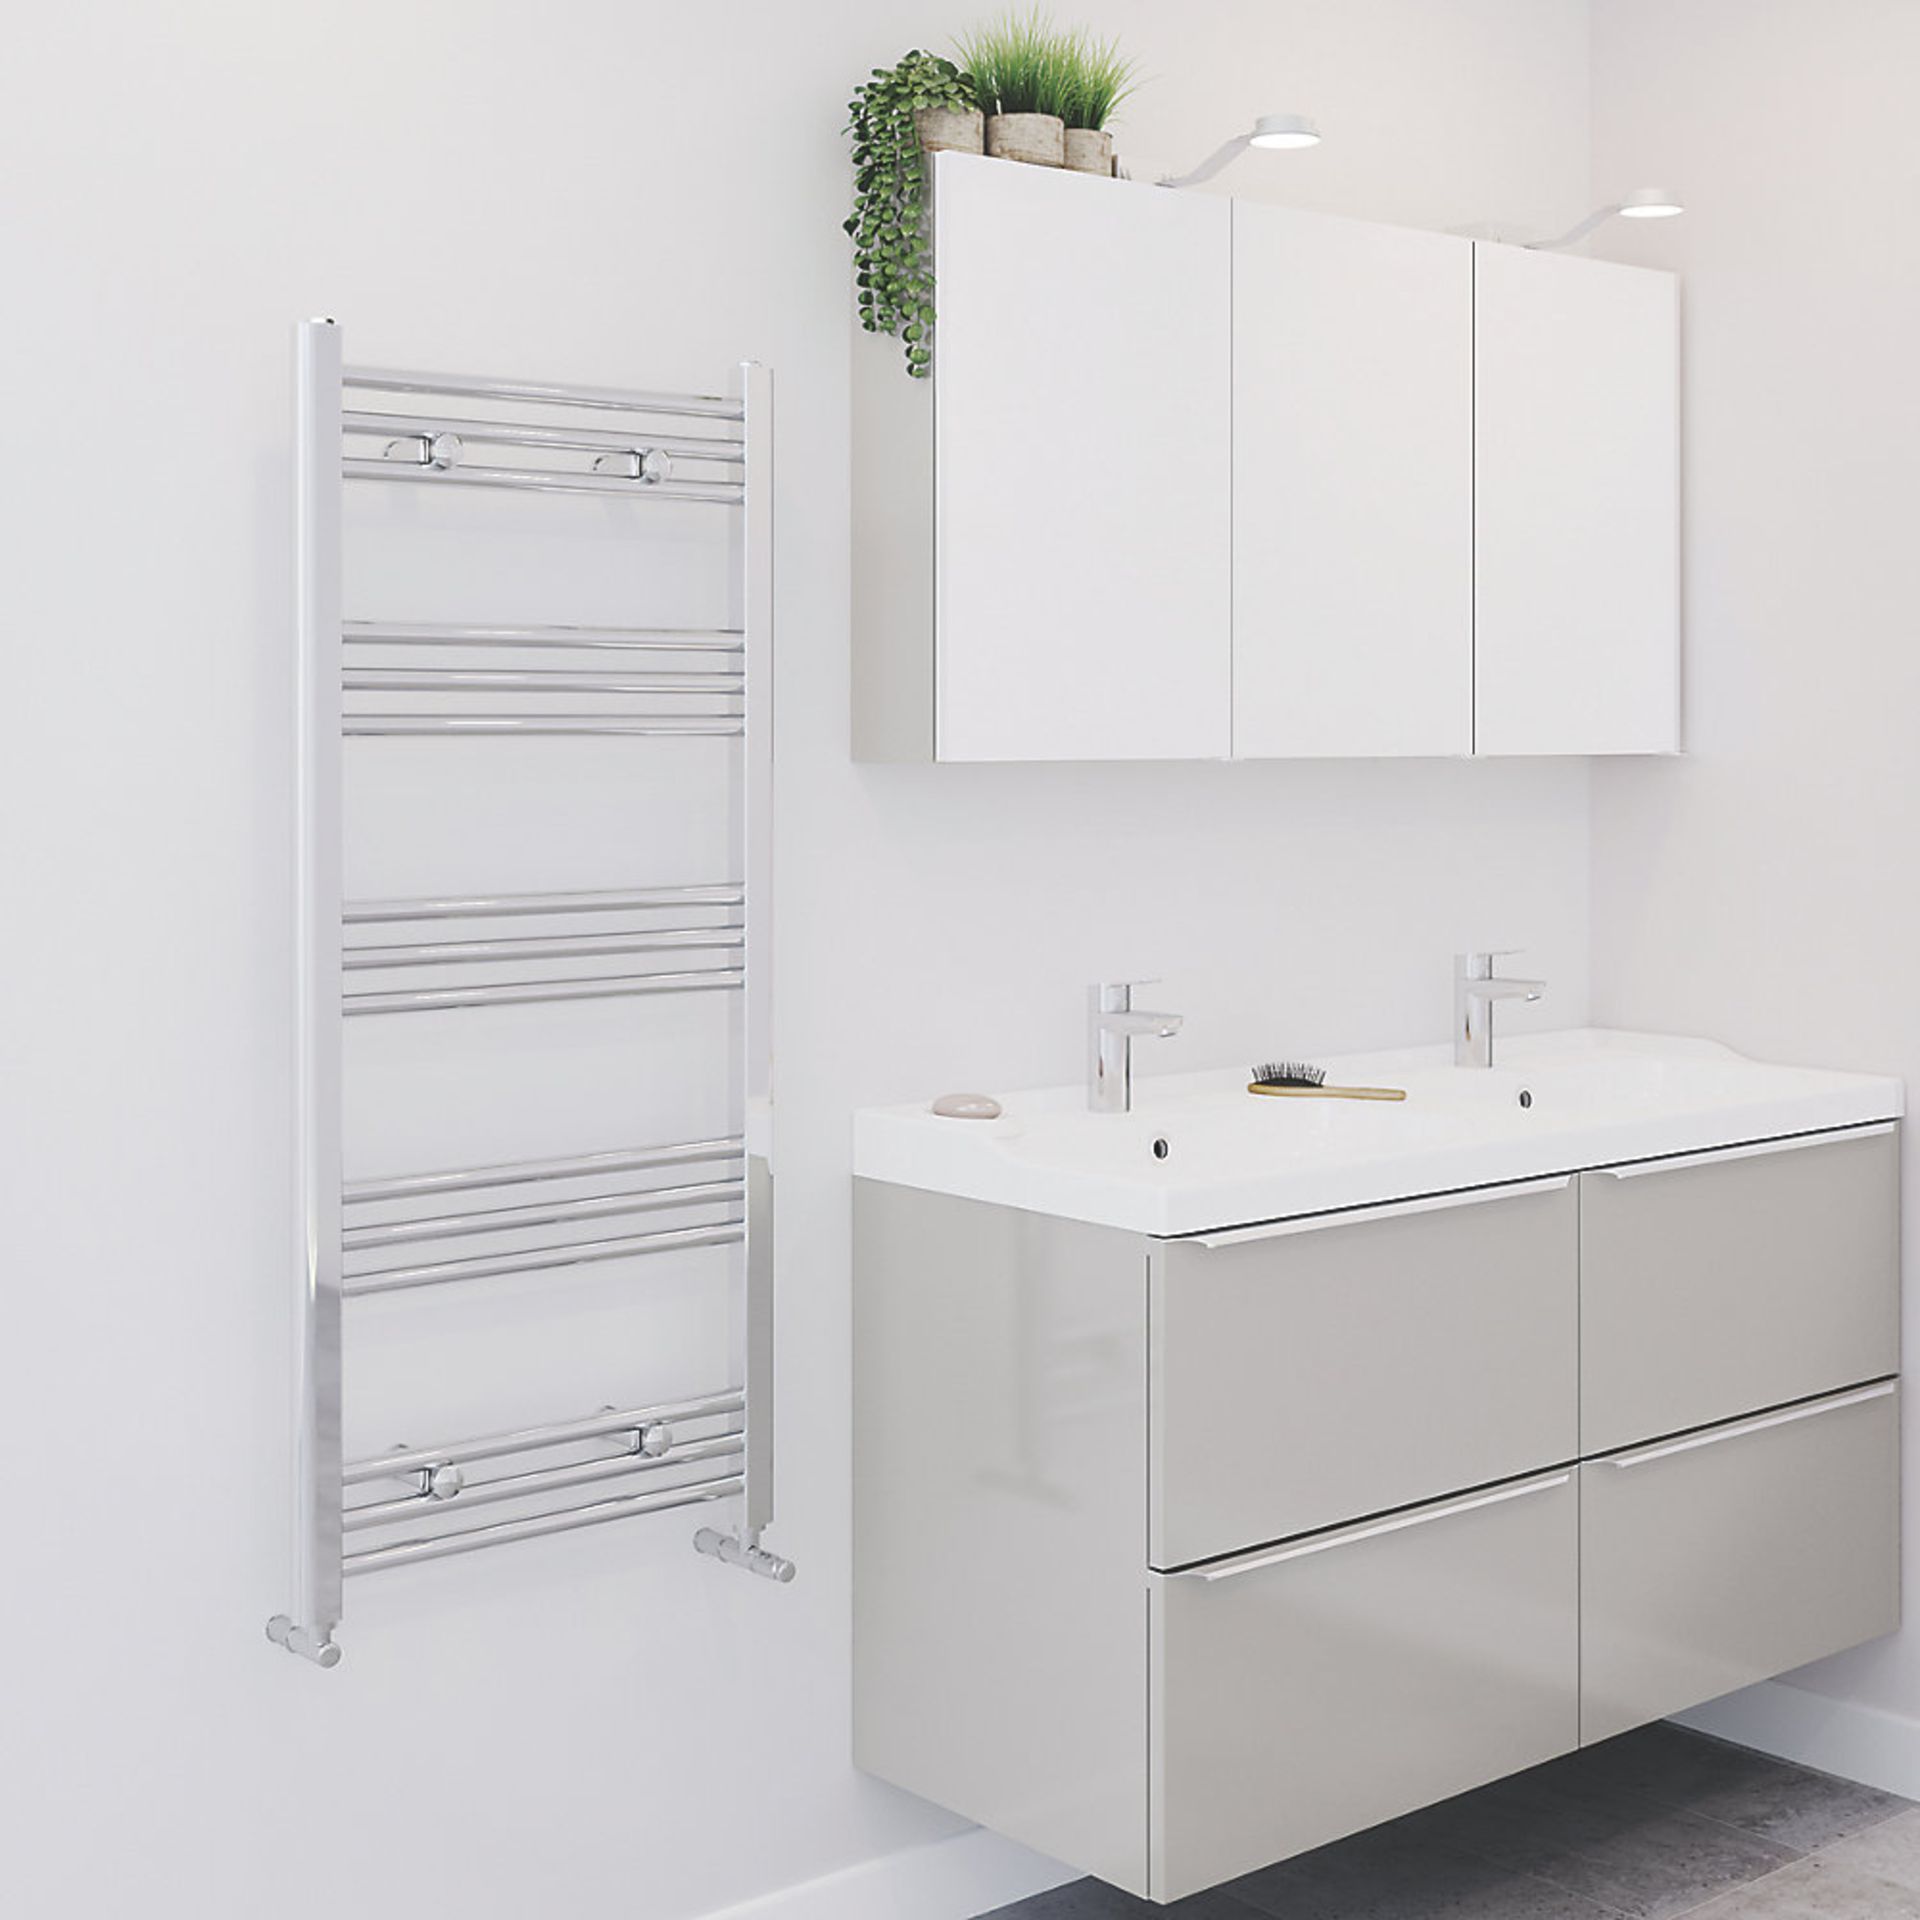 (KL108) 1100 X 500mm Chrome Towel Warmer. Gloss Mild Steel Construction Suitable for Domestic